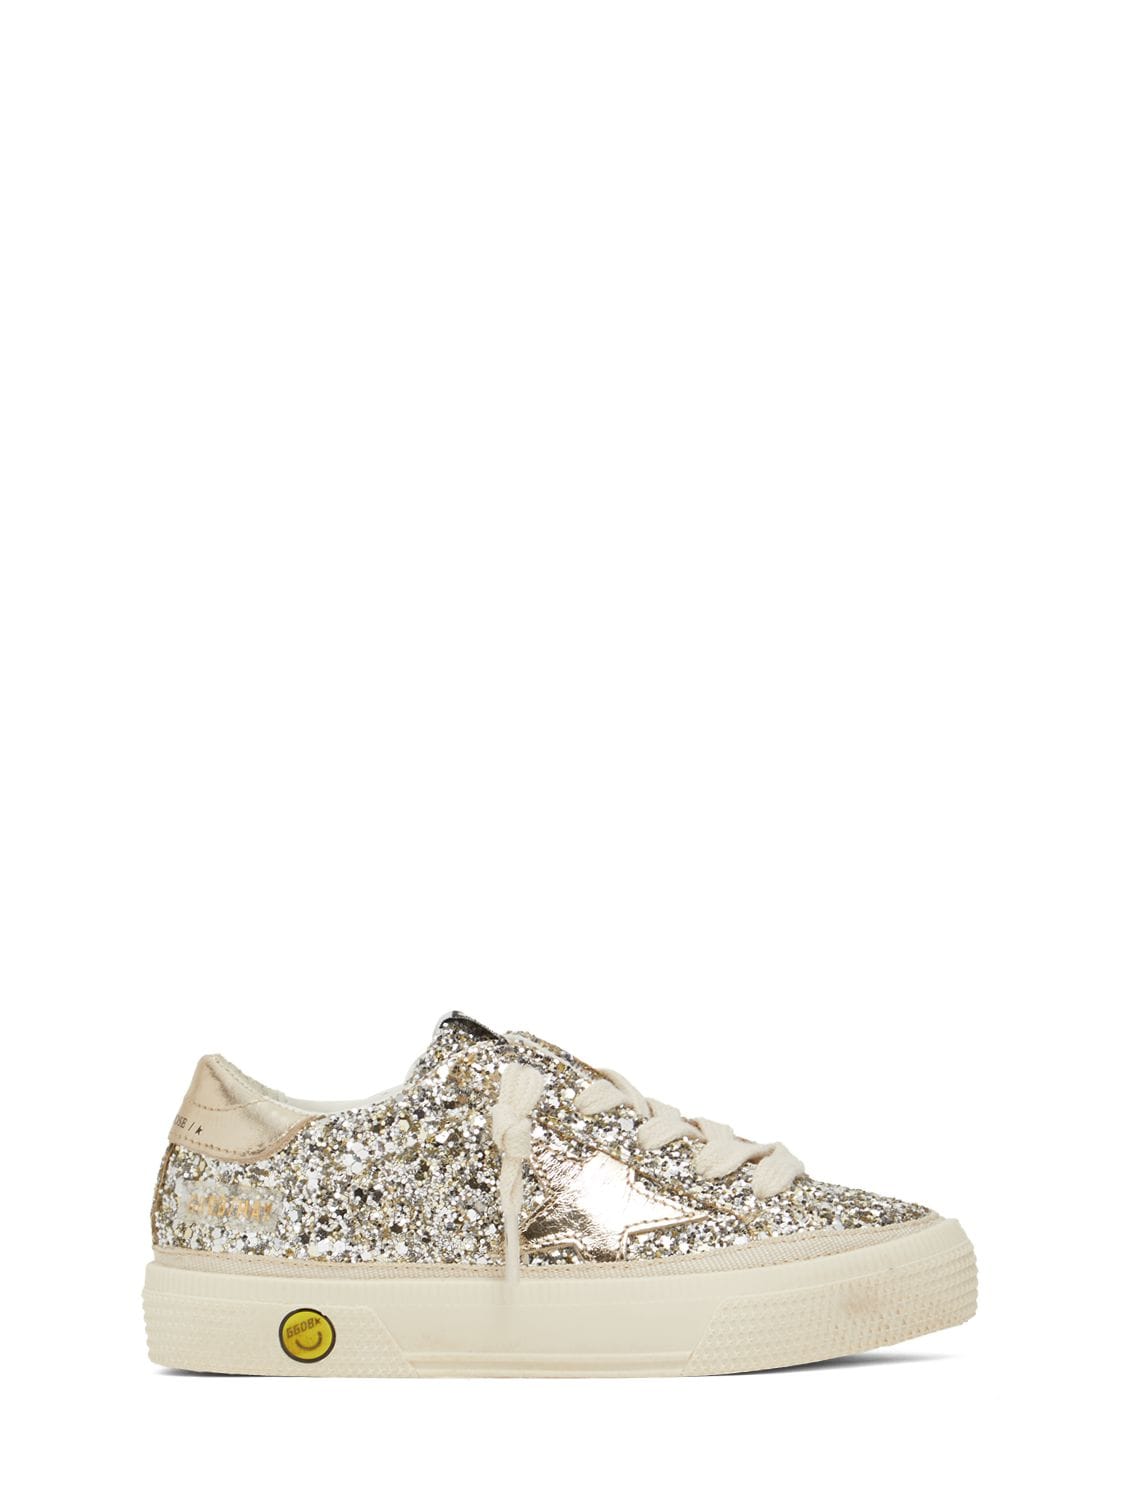 Golden Goose Kids' May Glittered Lace-up Sneakers In Platinum